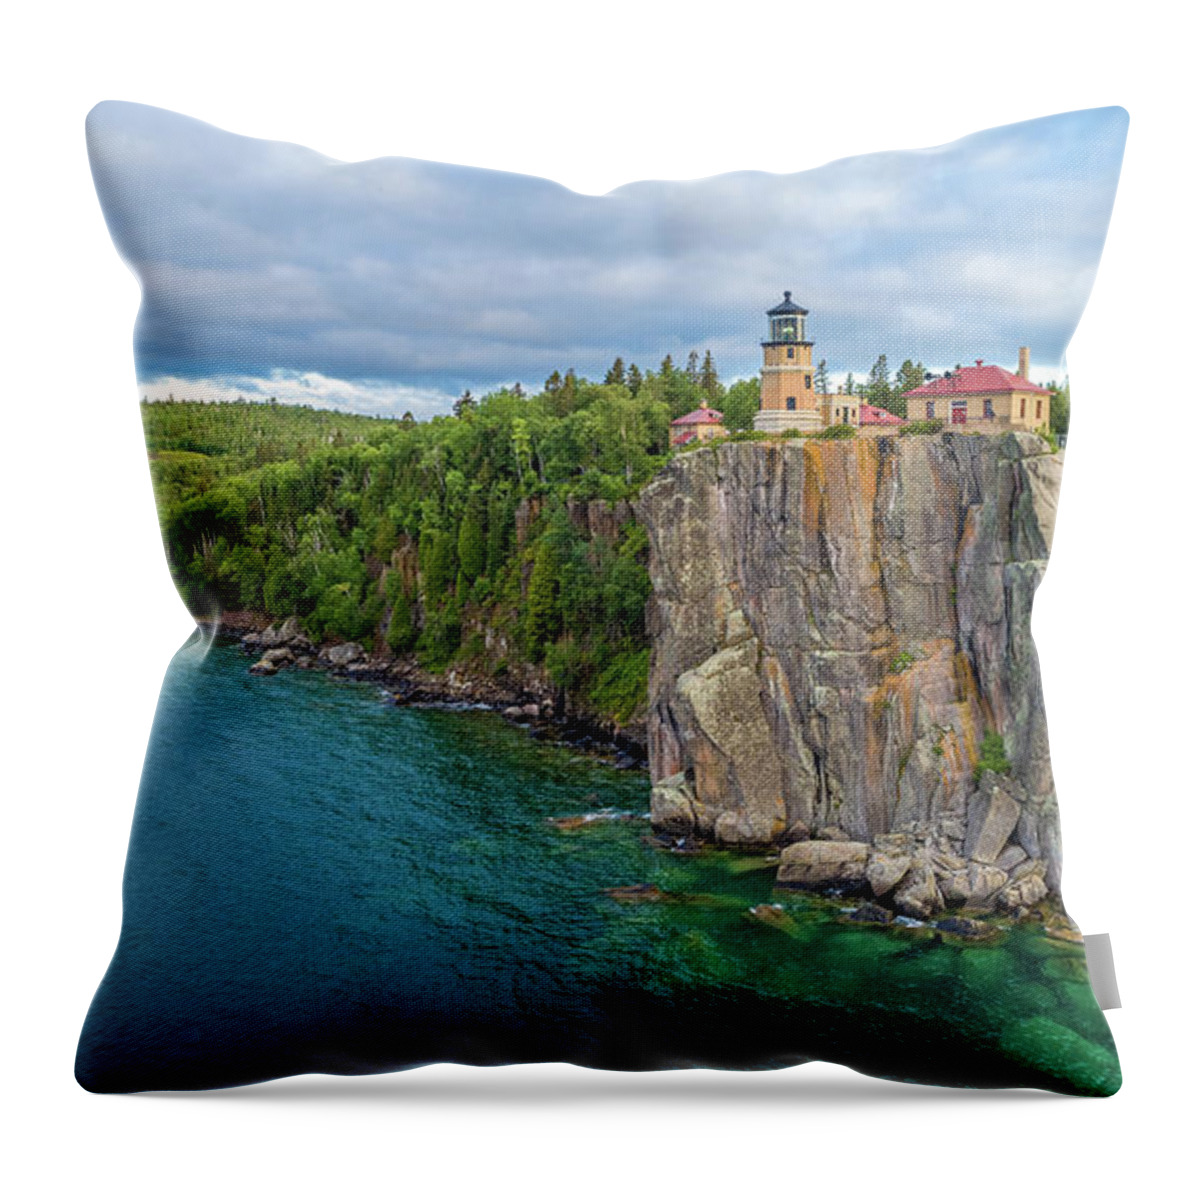 Split Rock Lighthouse Throw Pillow featuring the photograph Split Rock Lighthouse Aerial by Sebastian Musial